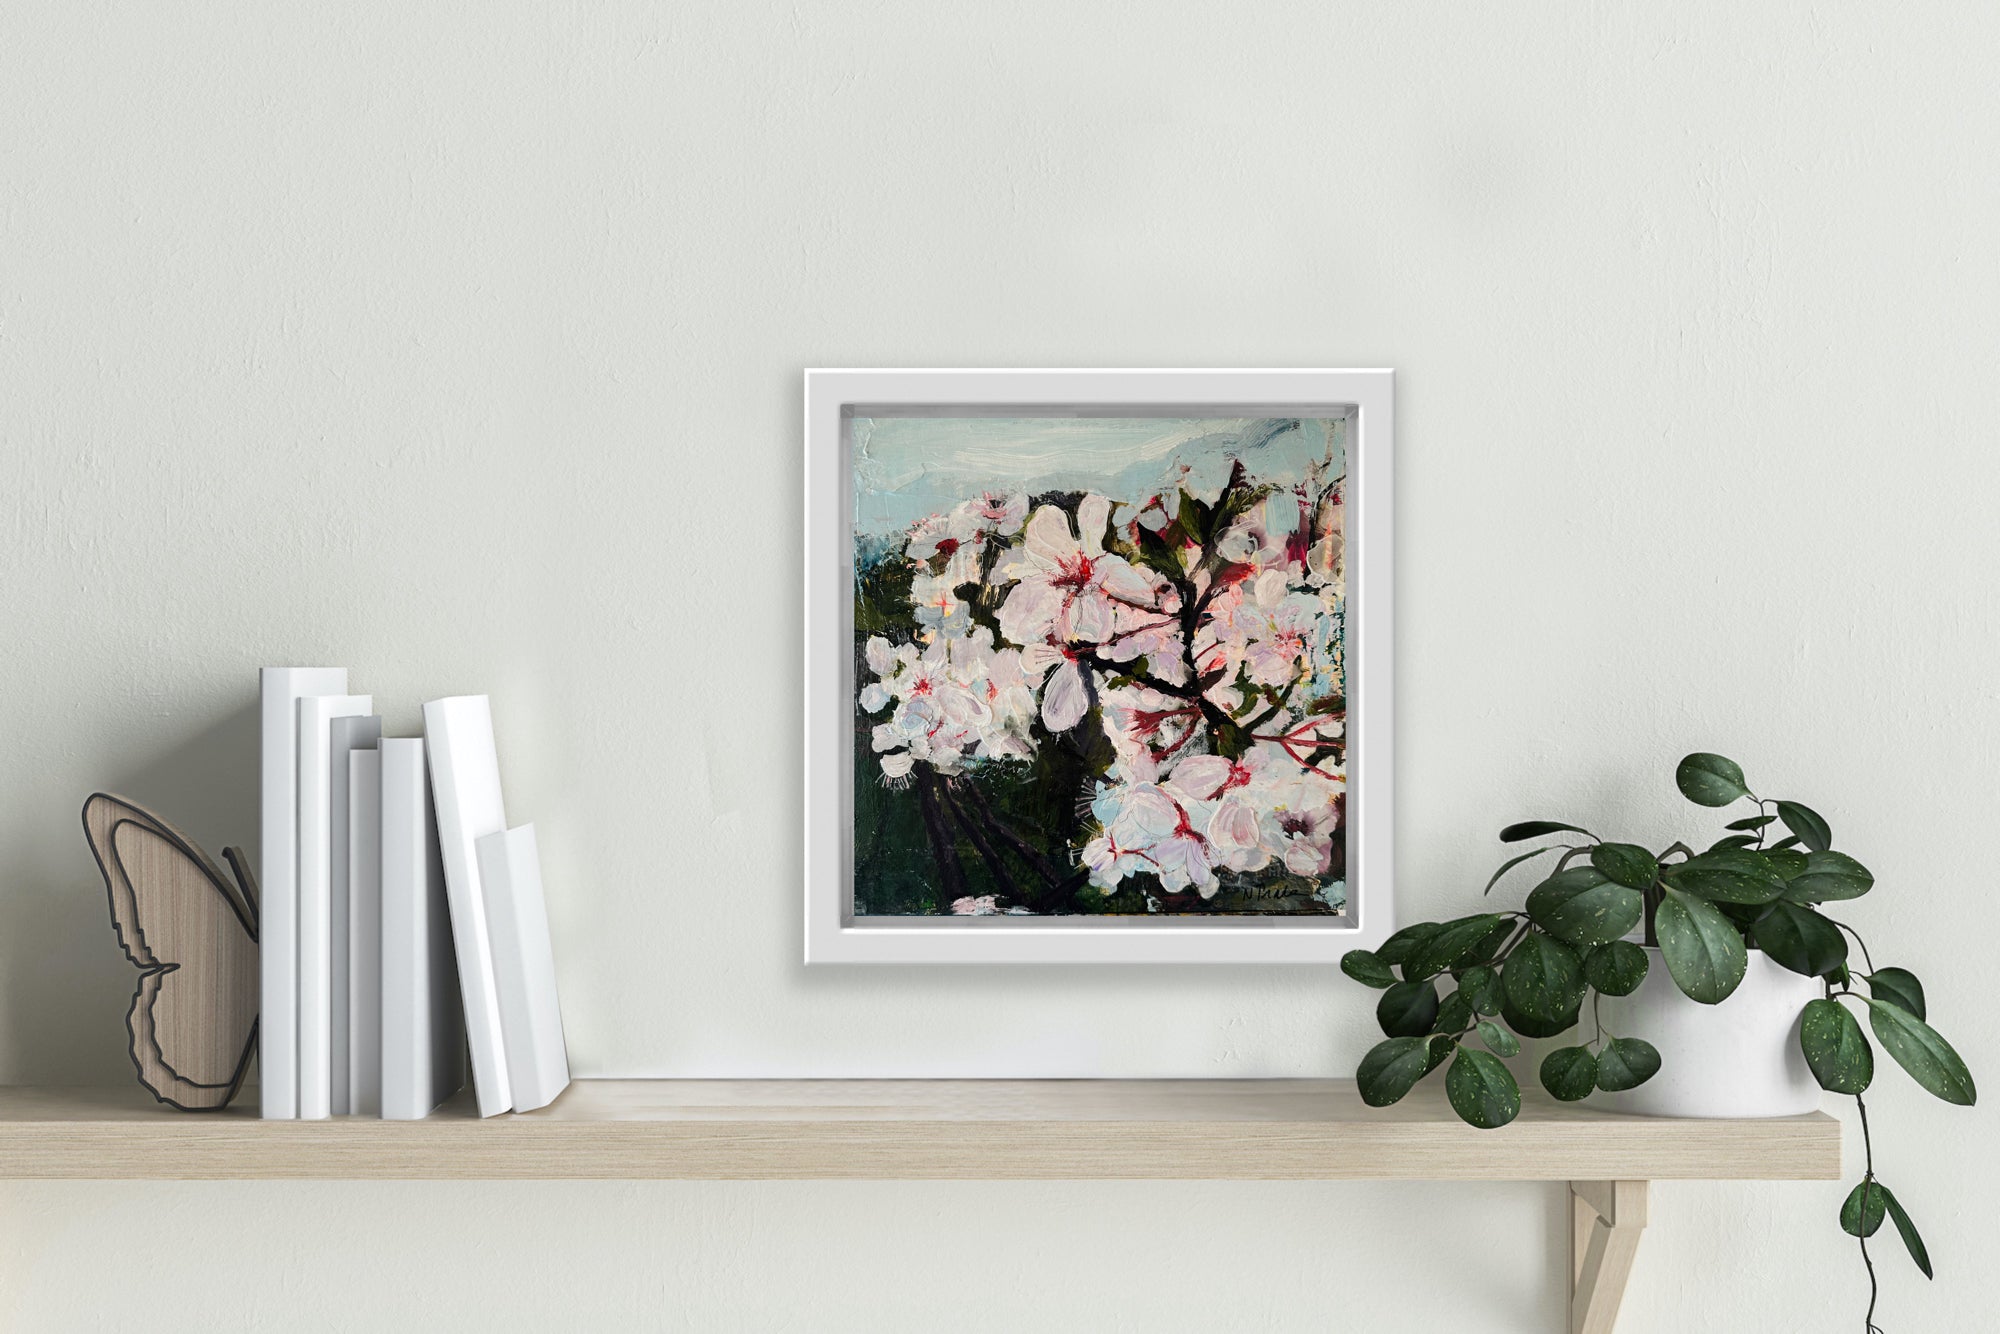 A painting of wild plum blossoms hangs above a shelf.